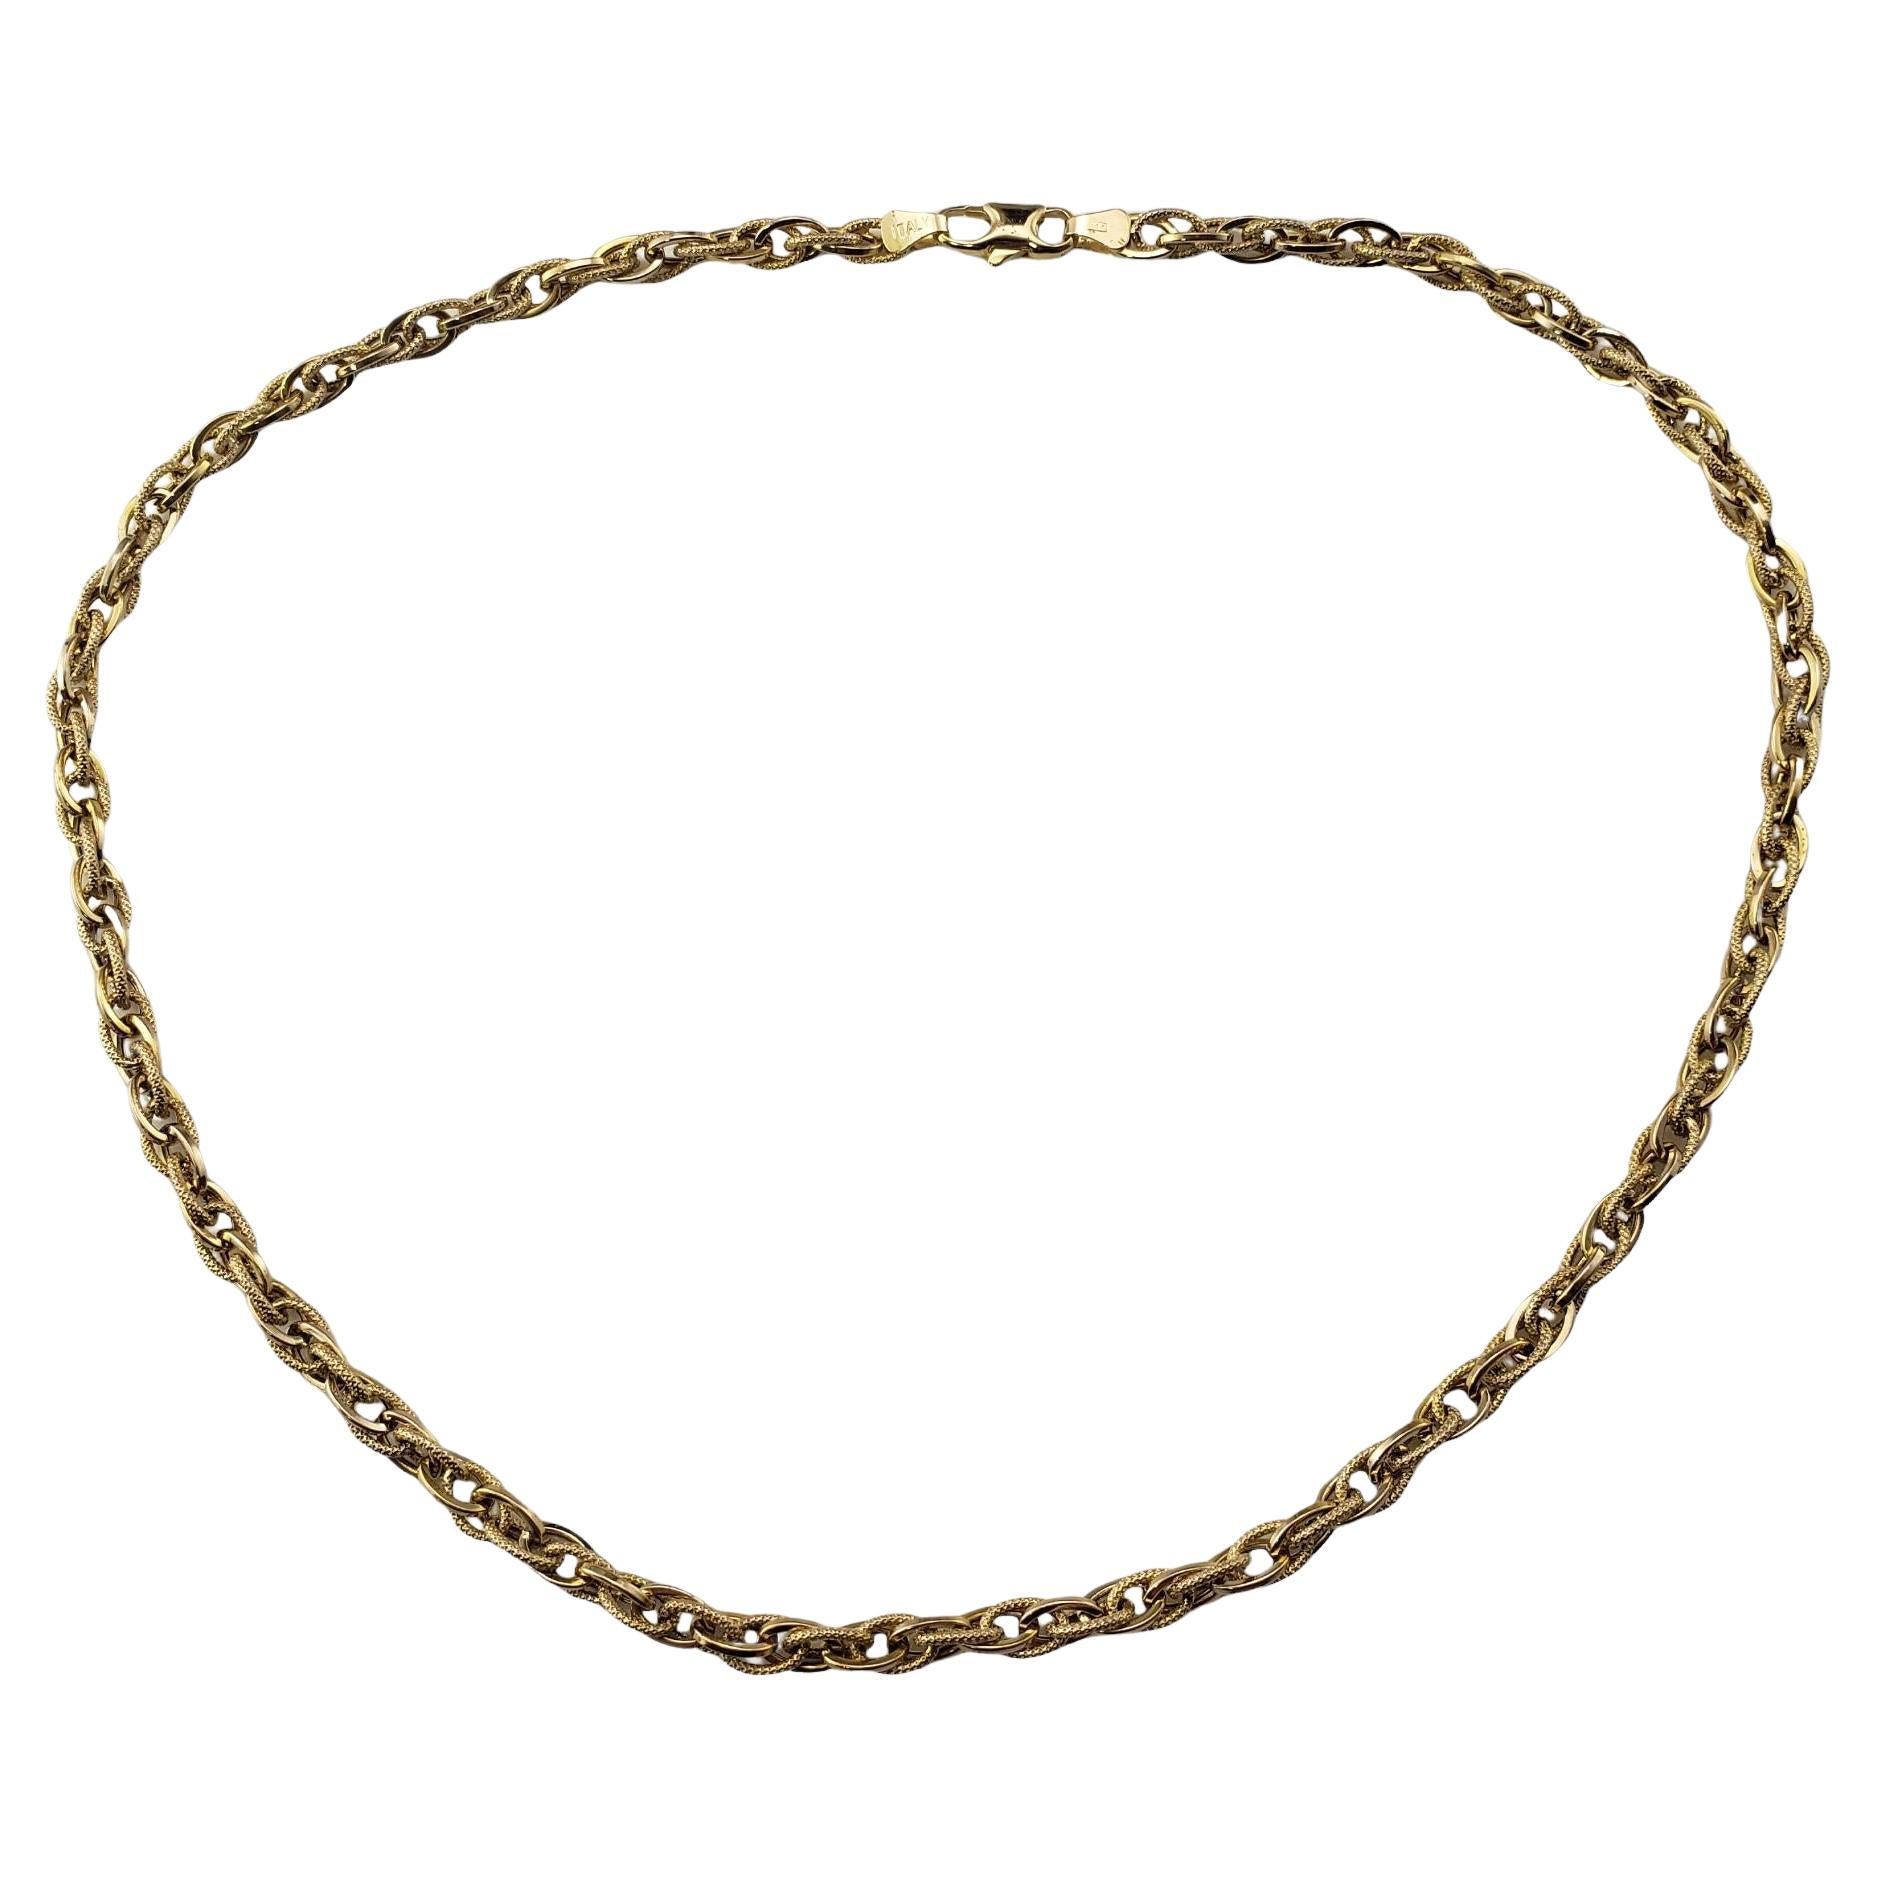  14 Karat Yellow Gold Cable Chain Necklace #15528 For Sale